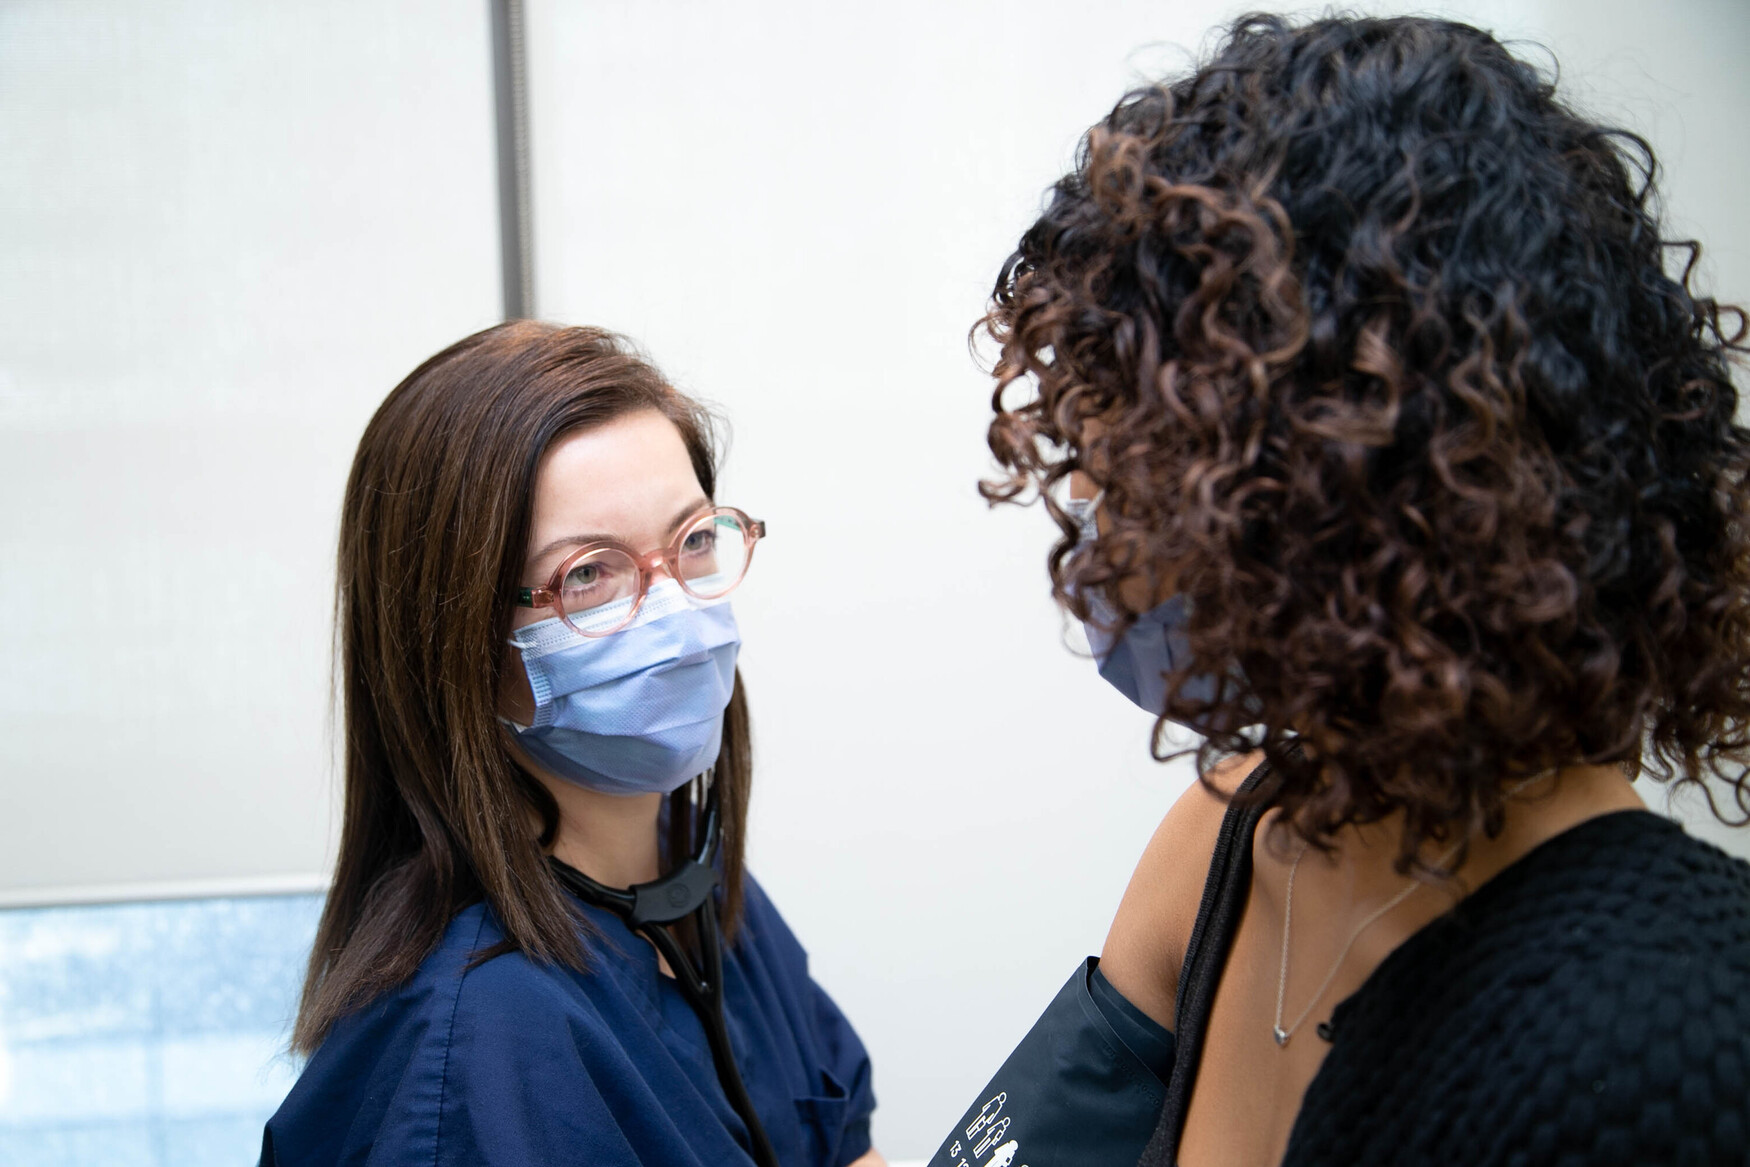 Professor Danielle Martin speaks to a patient while checking their blood pressure. Both wear blue surgical masks. Marin also wears glasses.